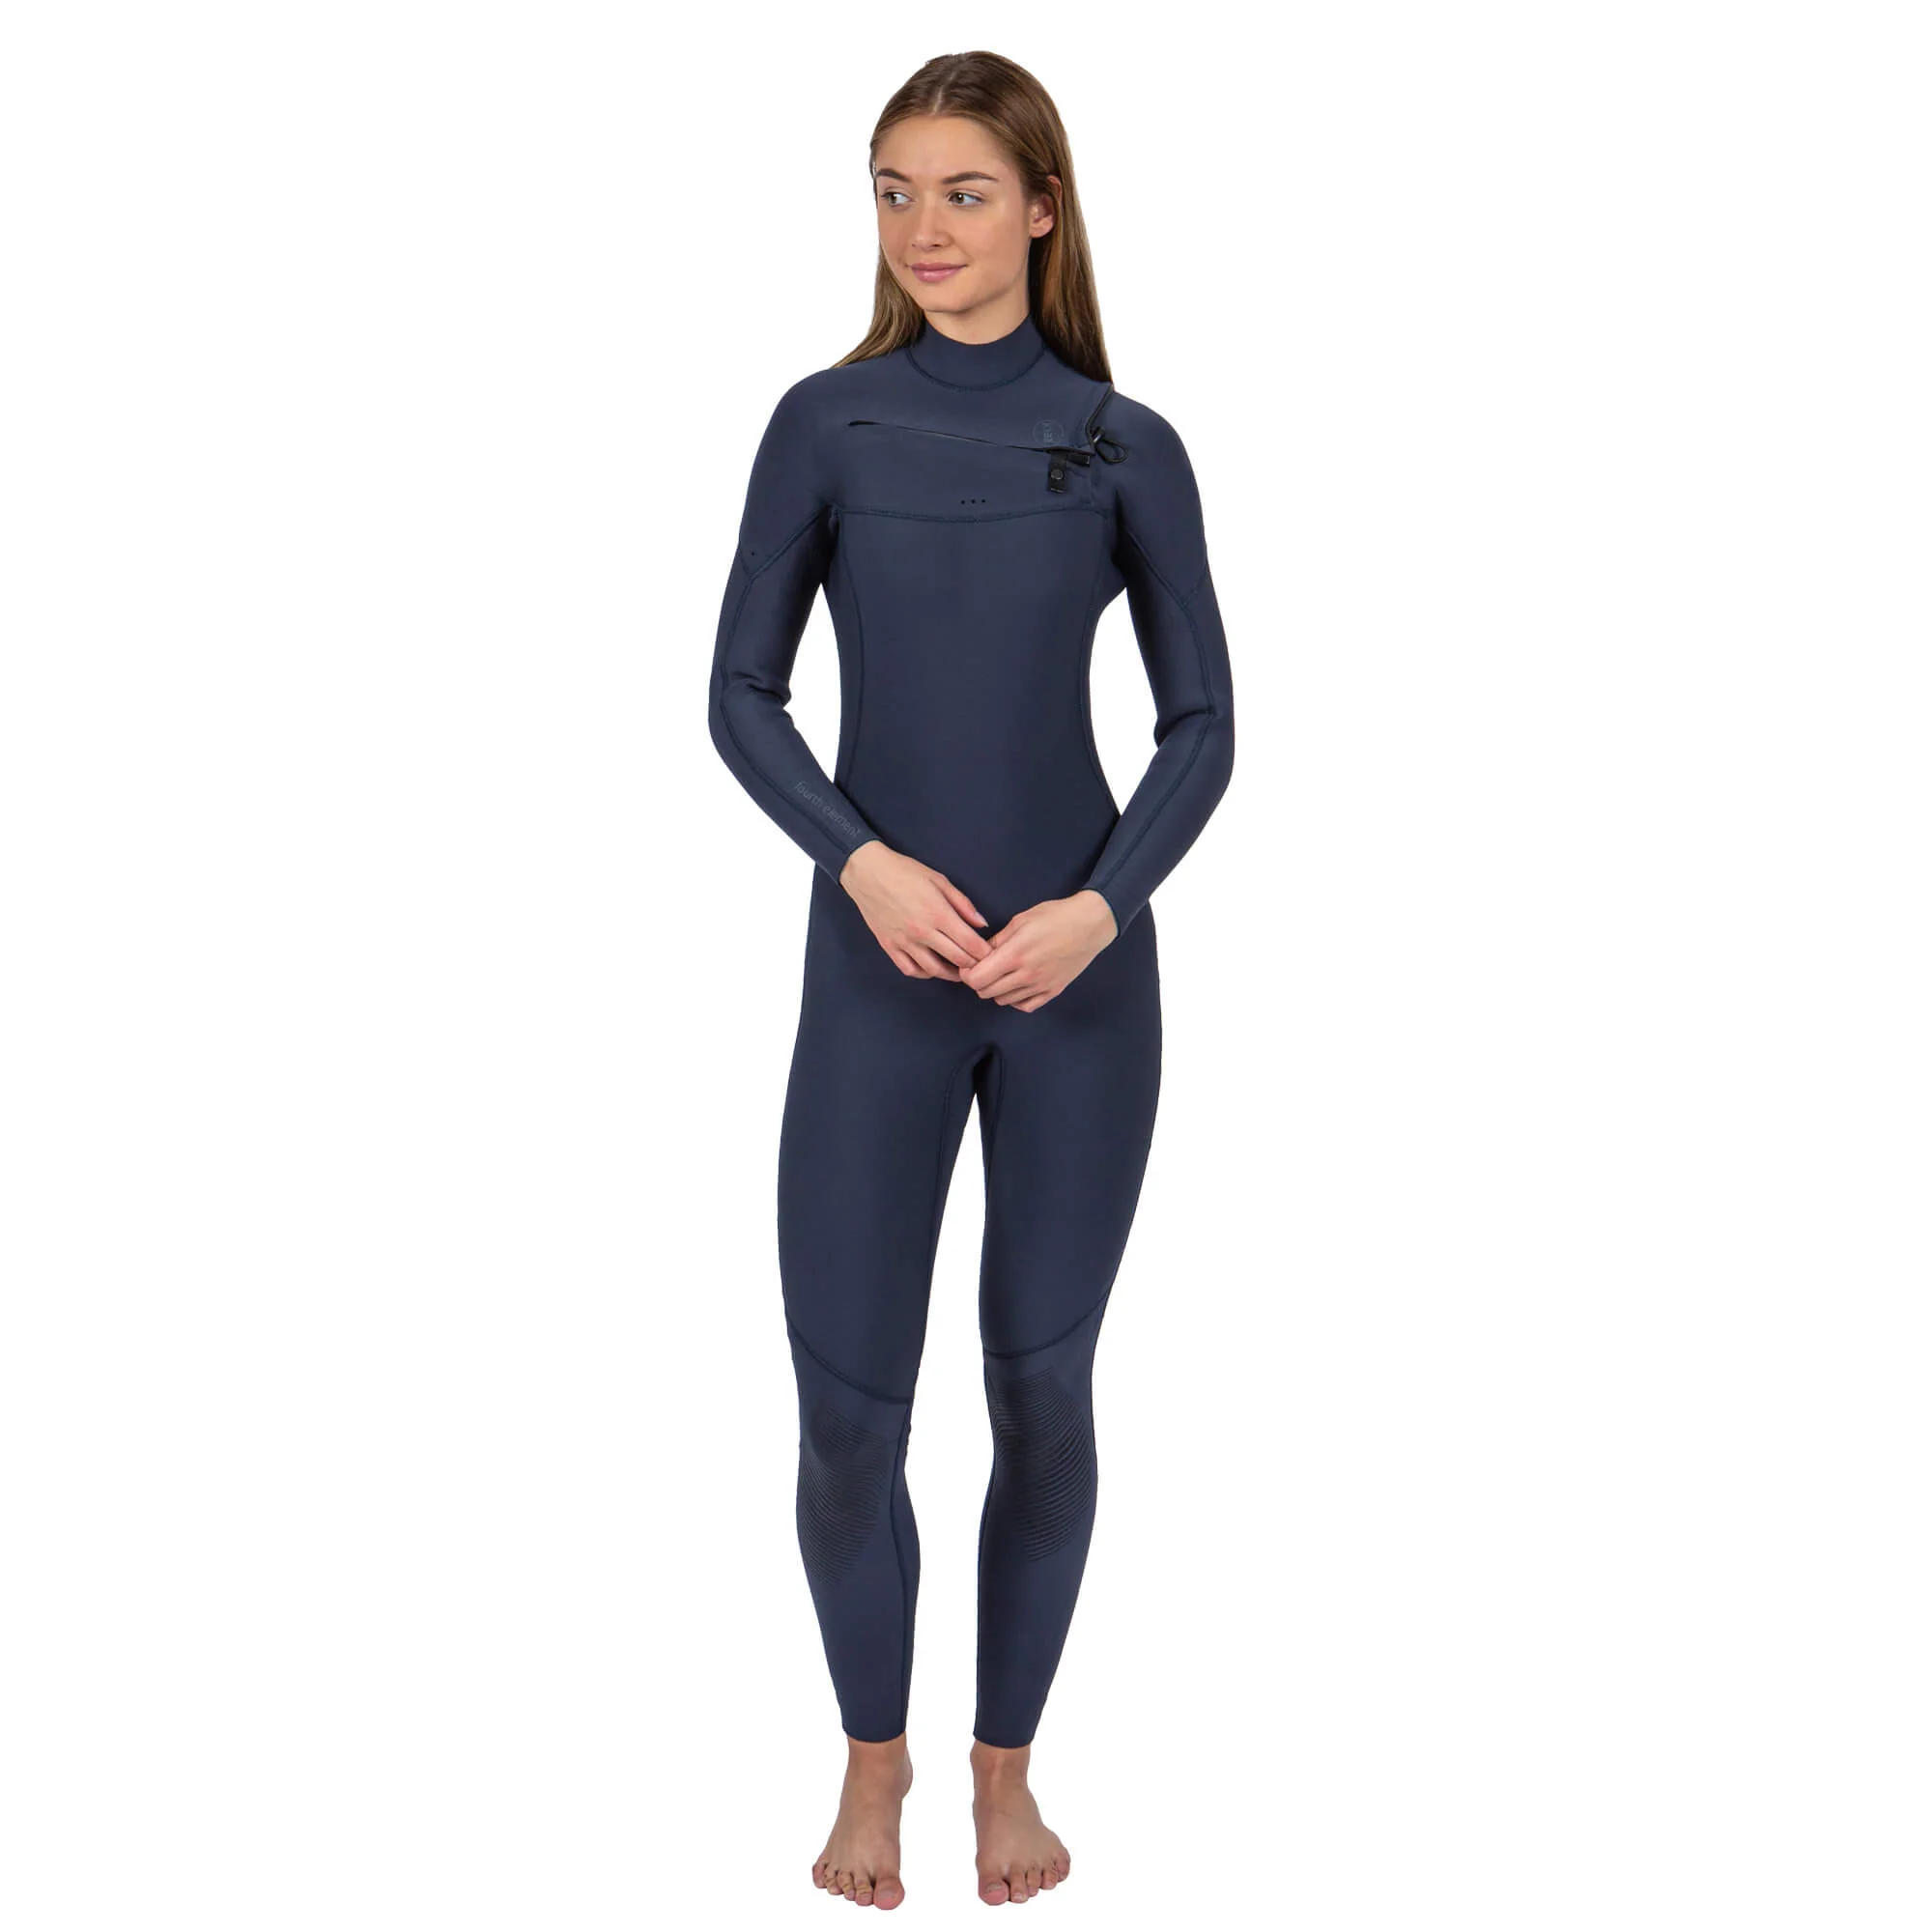 FOURTH ELEMENT WOMEN'S SURFACE 4/3MM WETSUIT